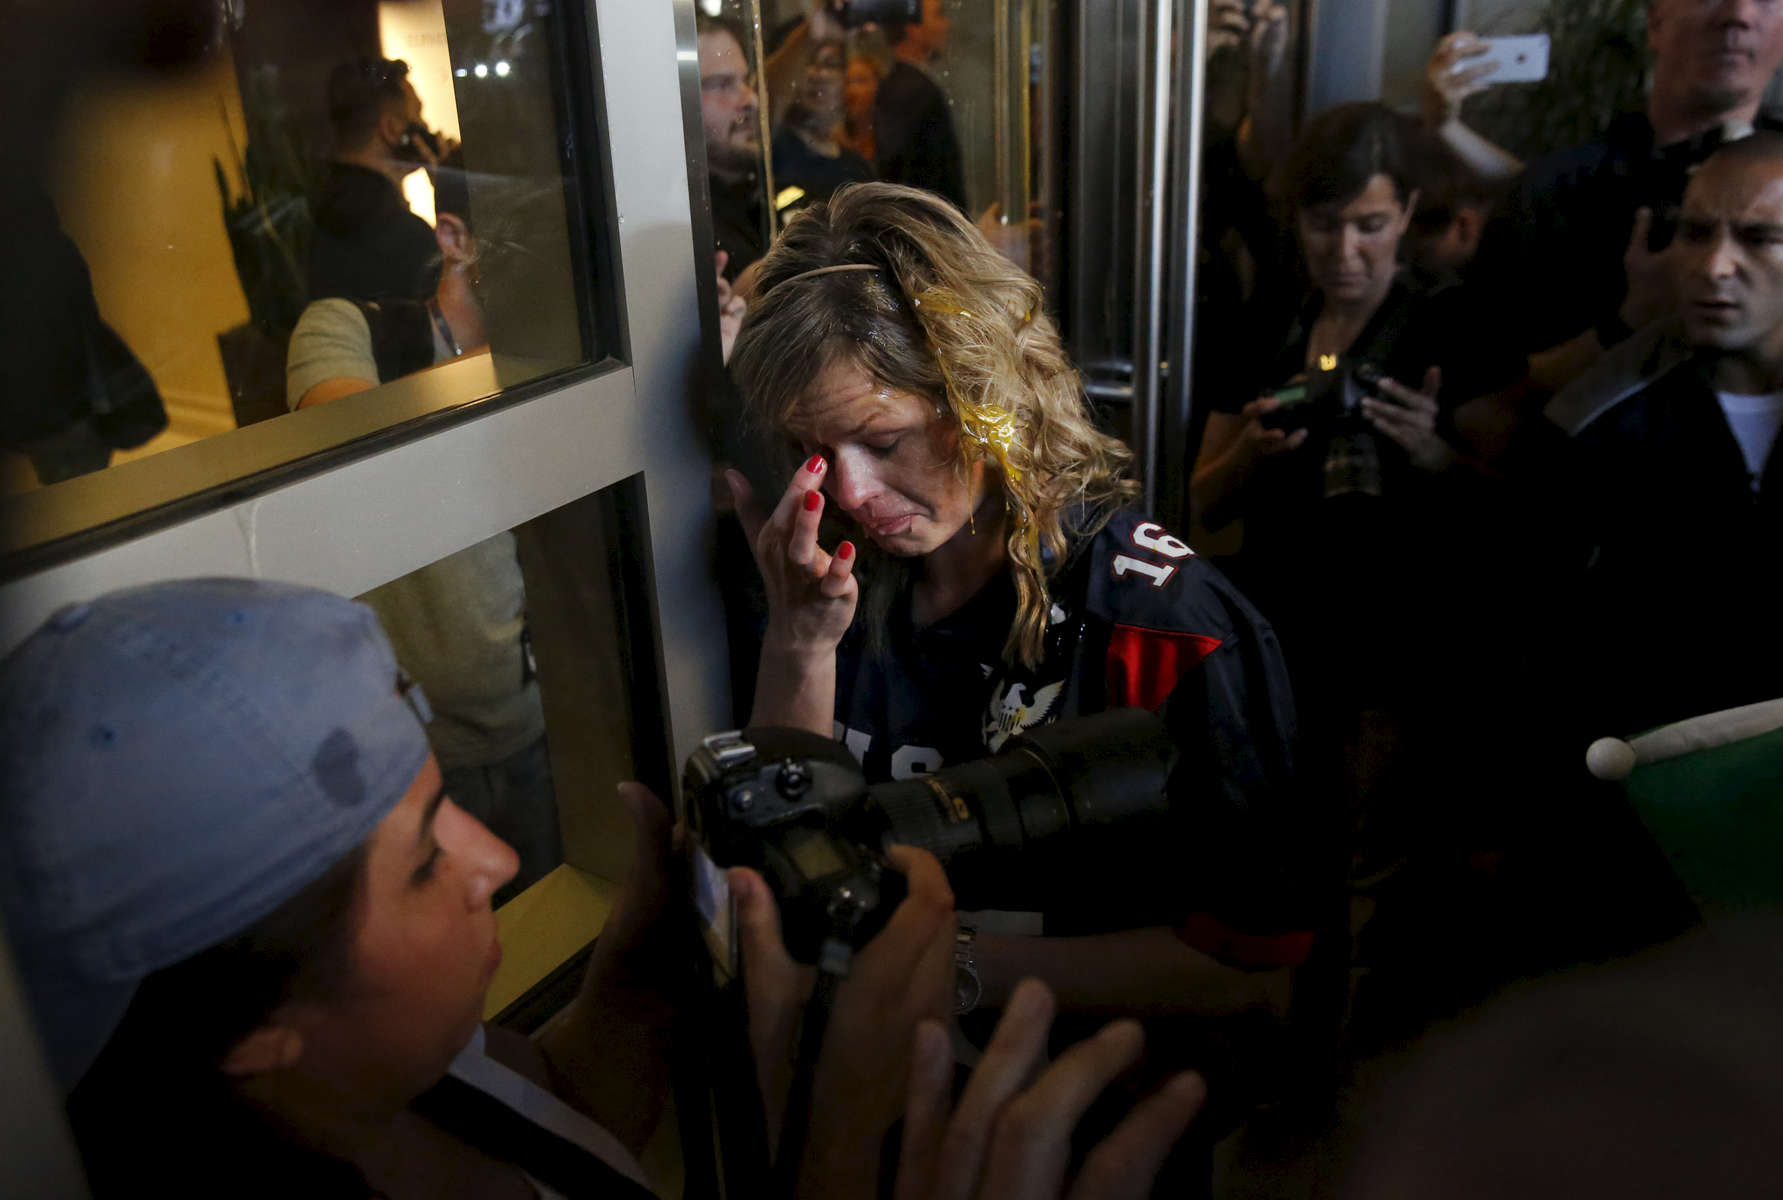 A Donald Trump supporter tries to clear her eyes after being cornered by an anti-Trump crowd and getting hit by multiple eggs near the convention center where presidential candidate Donald Trump held a campaign rally June 2, 2016 in downtown San Jose, Calif.